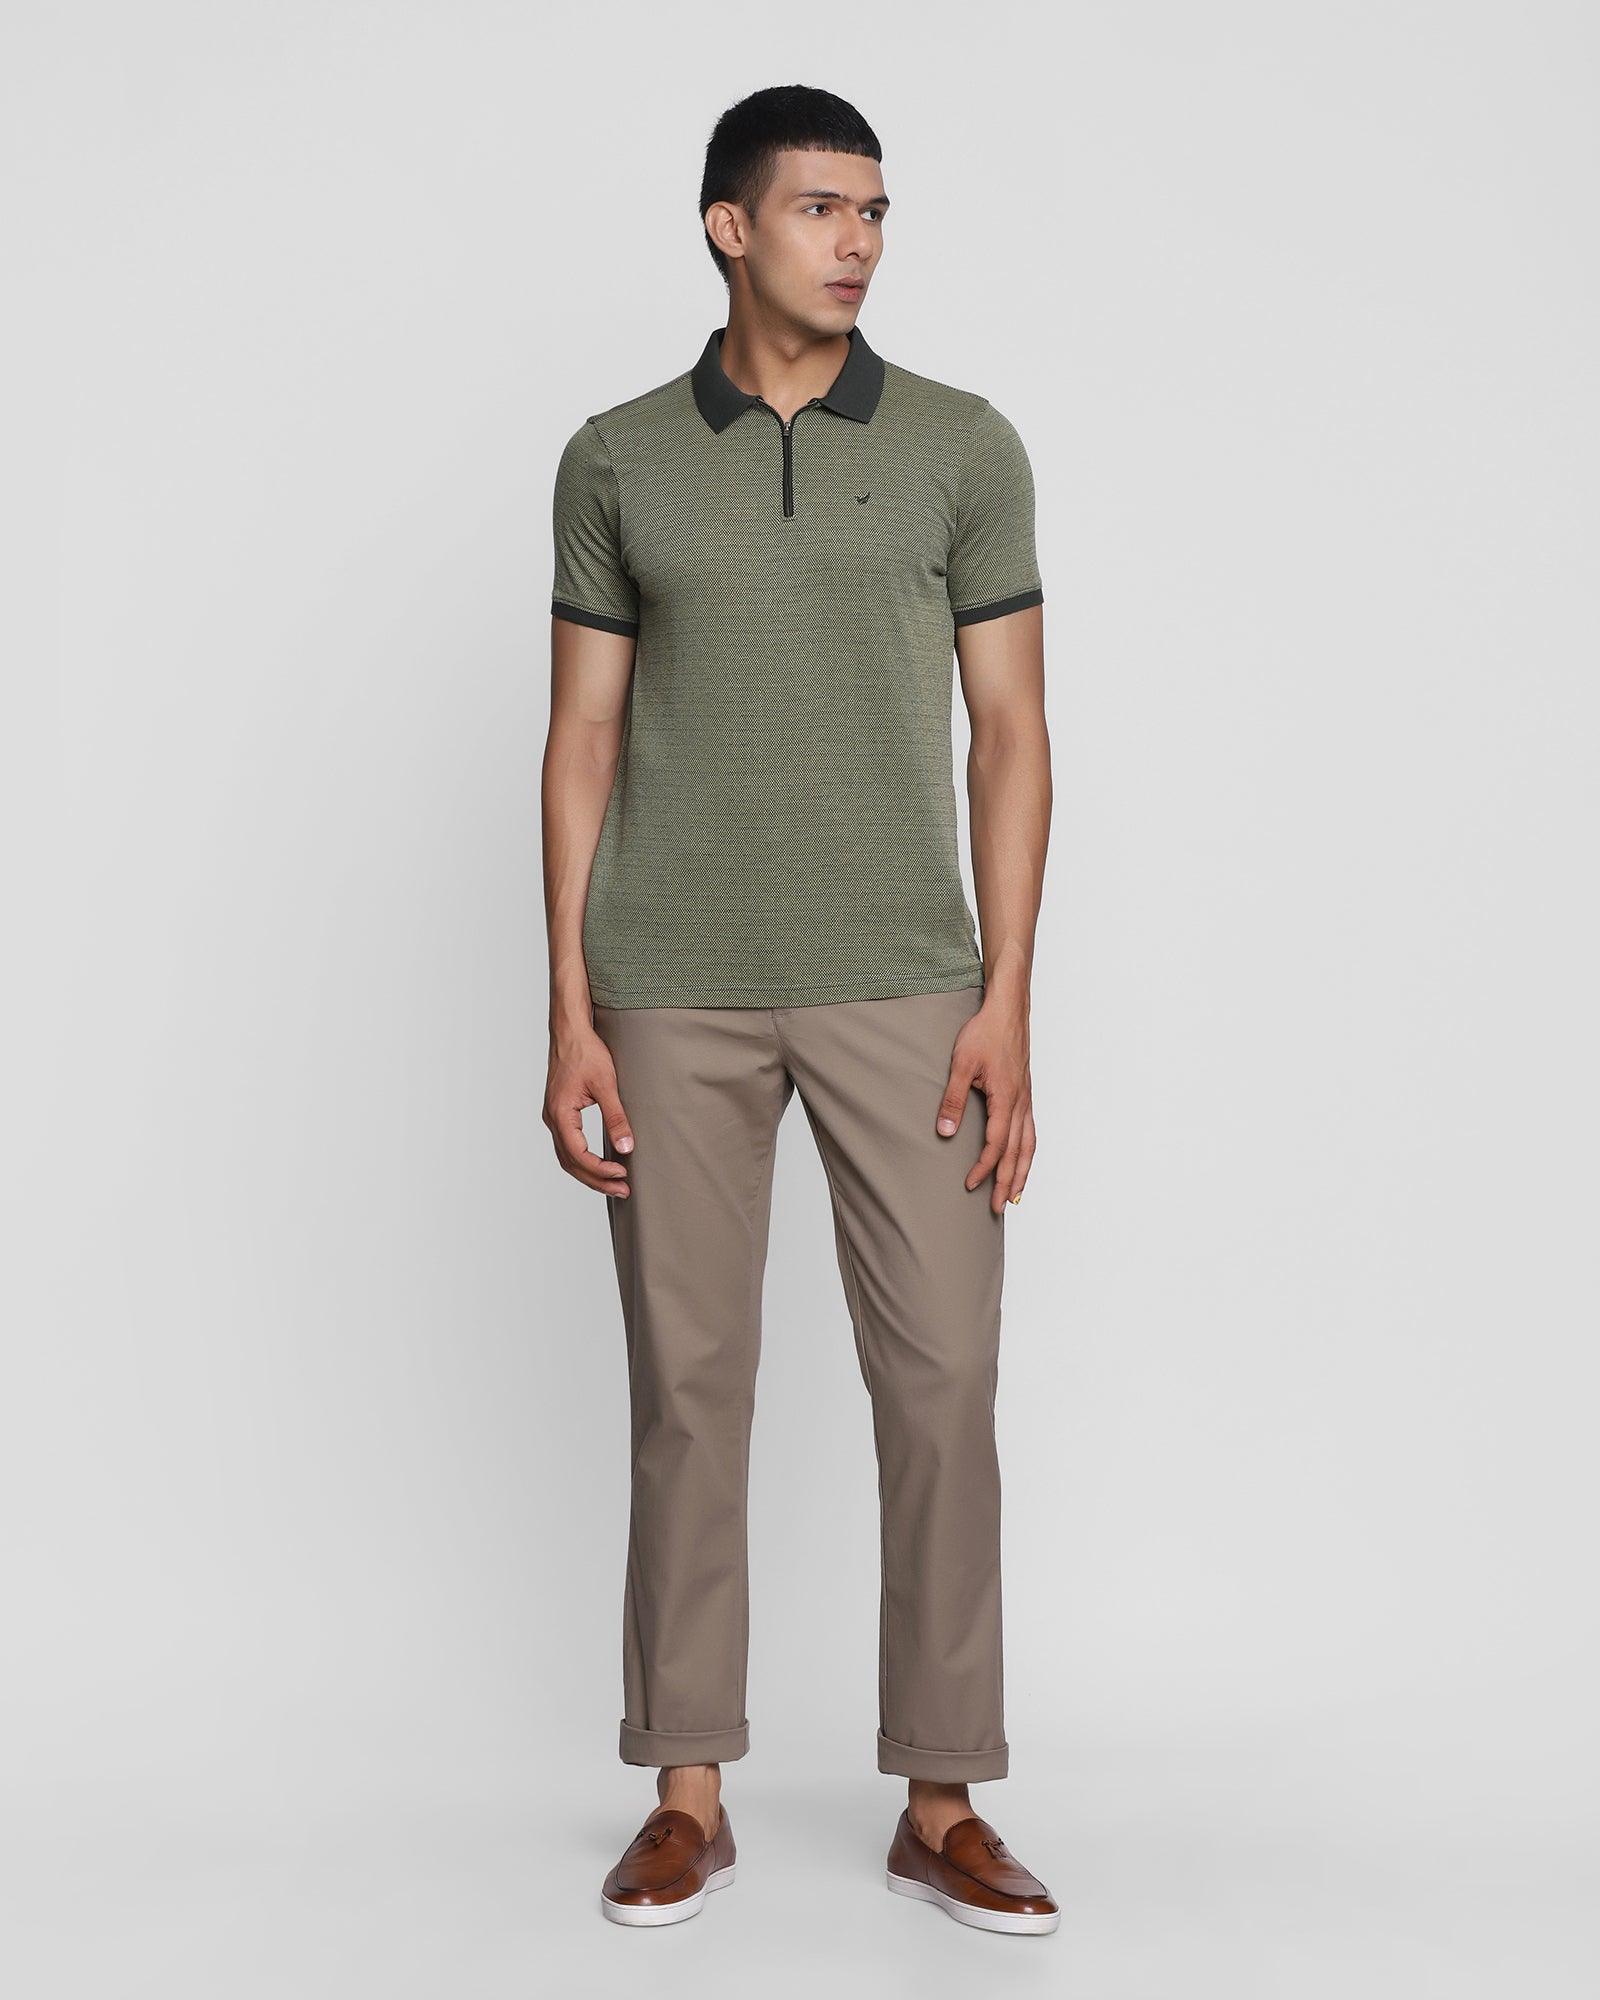 Straight B-90 Casual Mouse Textured Khakis - Altis